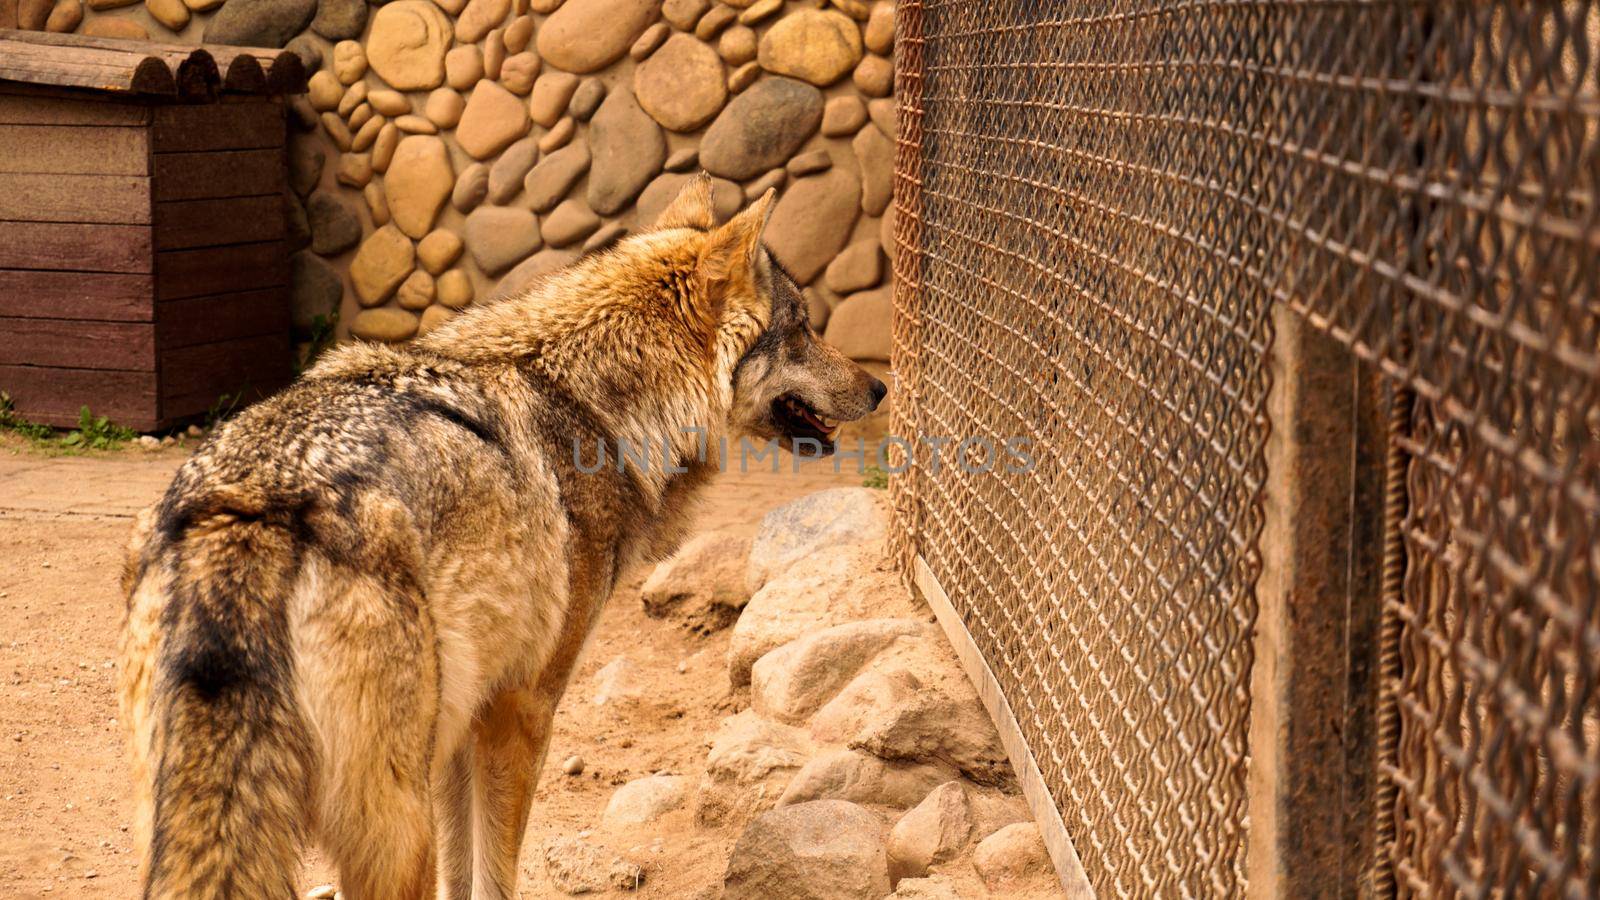 A lone wolf in a zoo cage. Keeping wild animals in captivity. The wild wolf looks at the cage